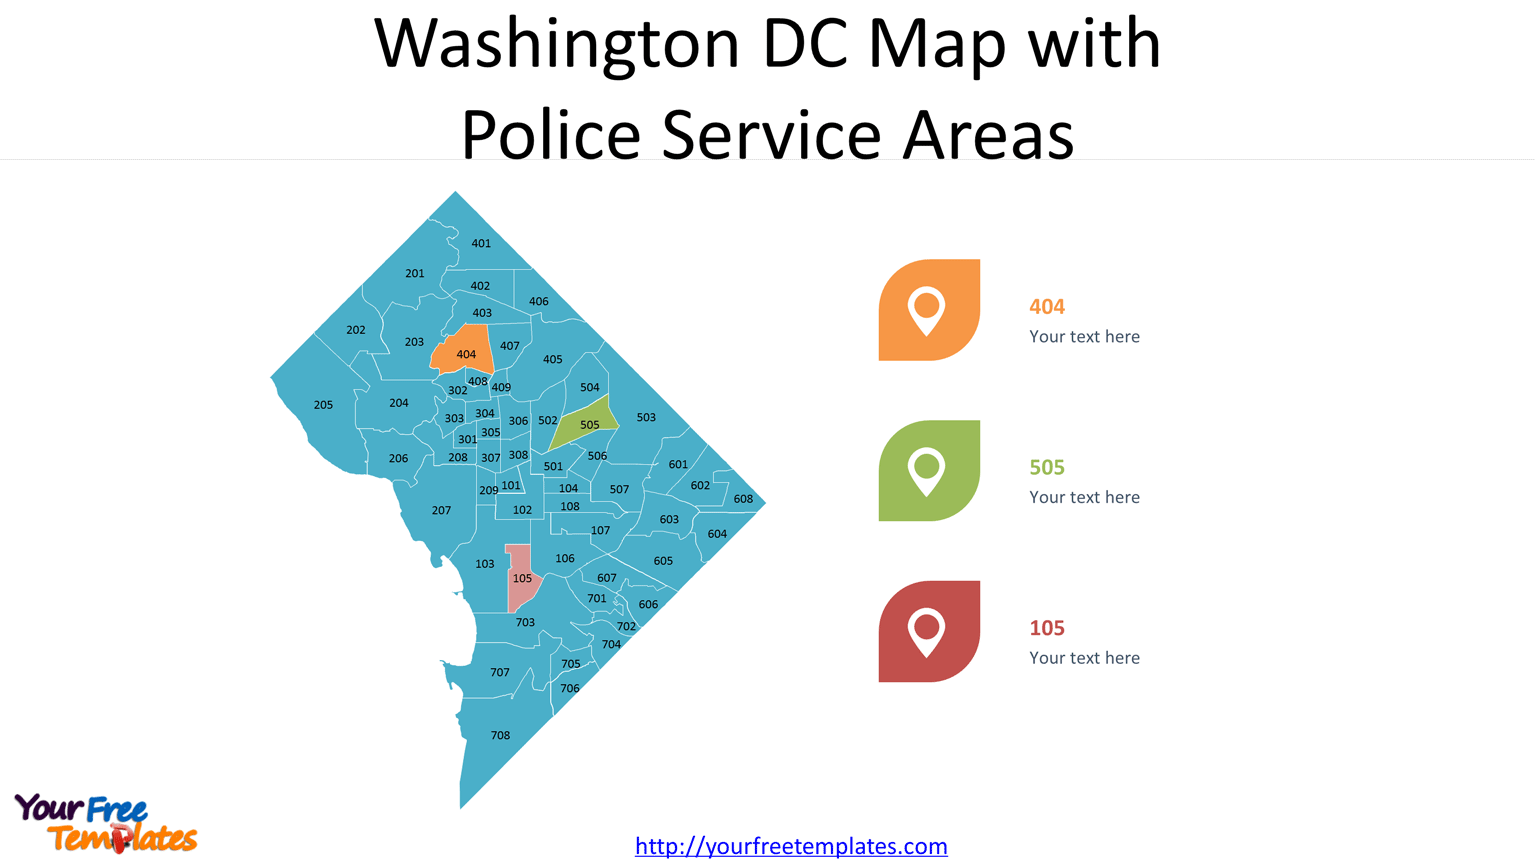 Washington DC Map with Police Service Areas